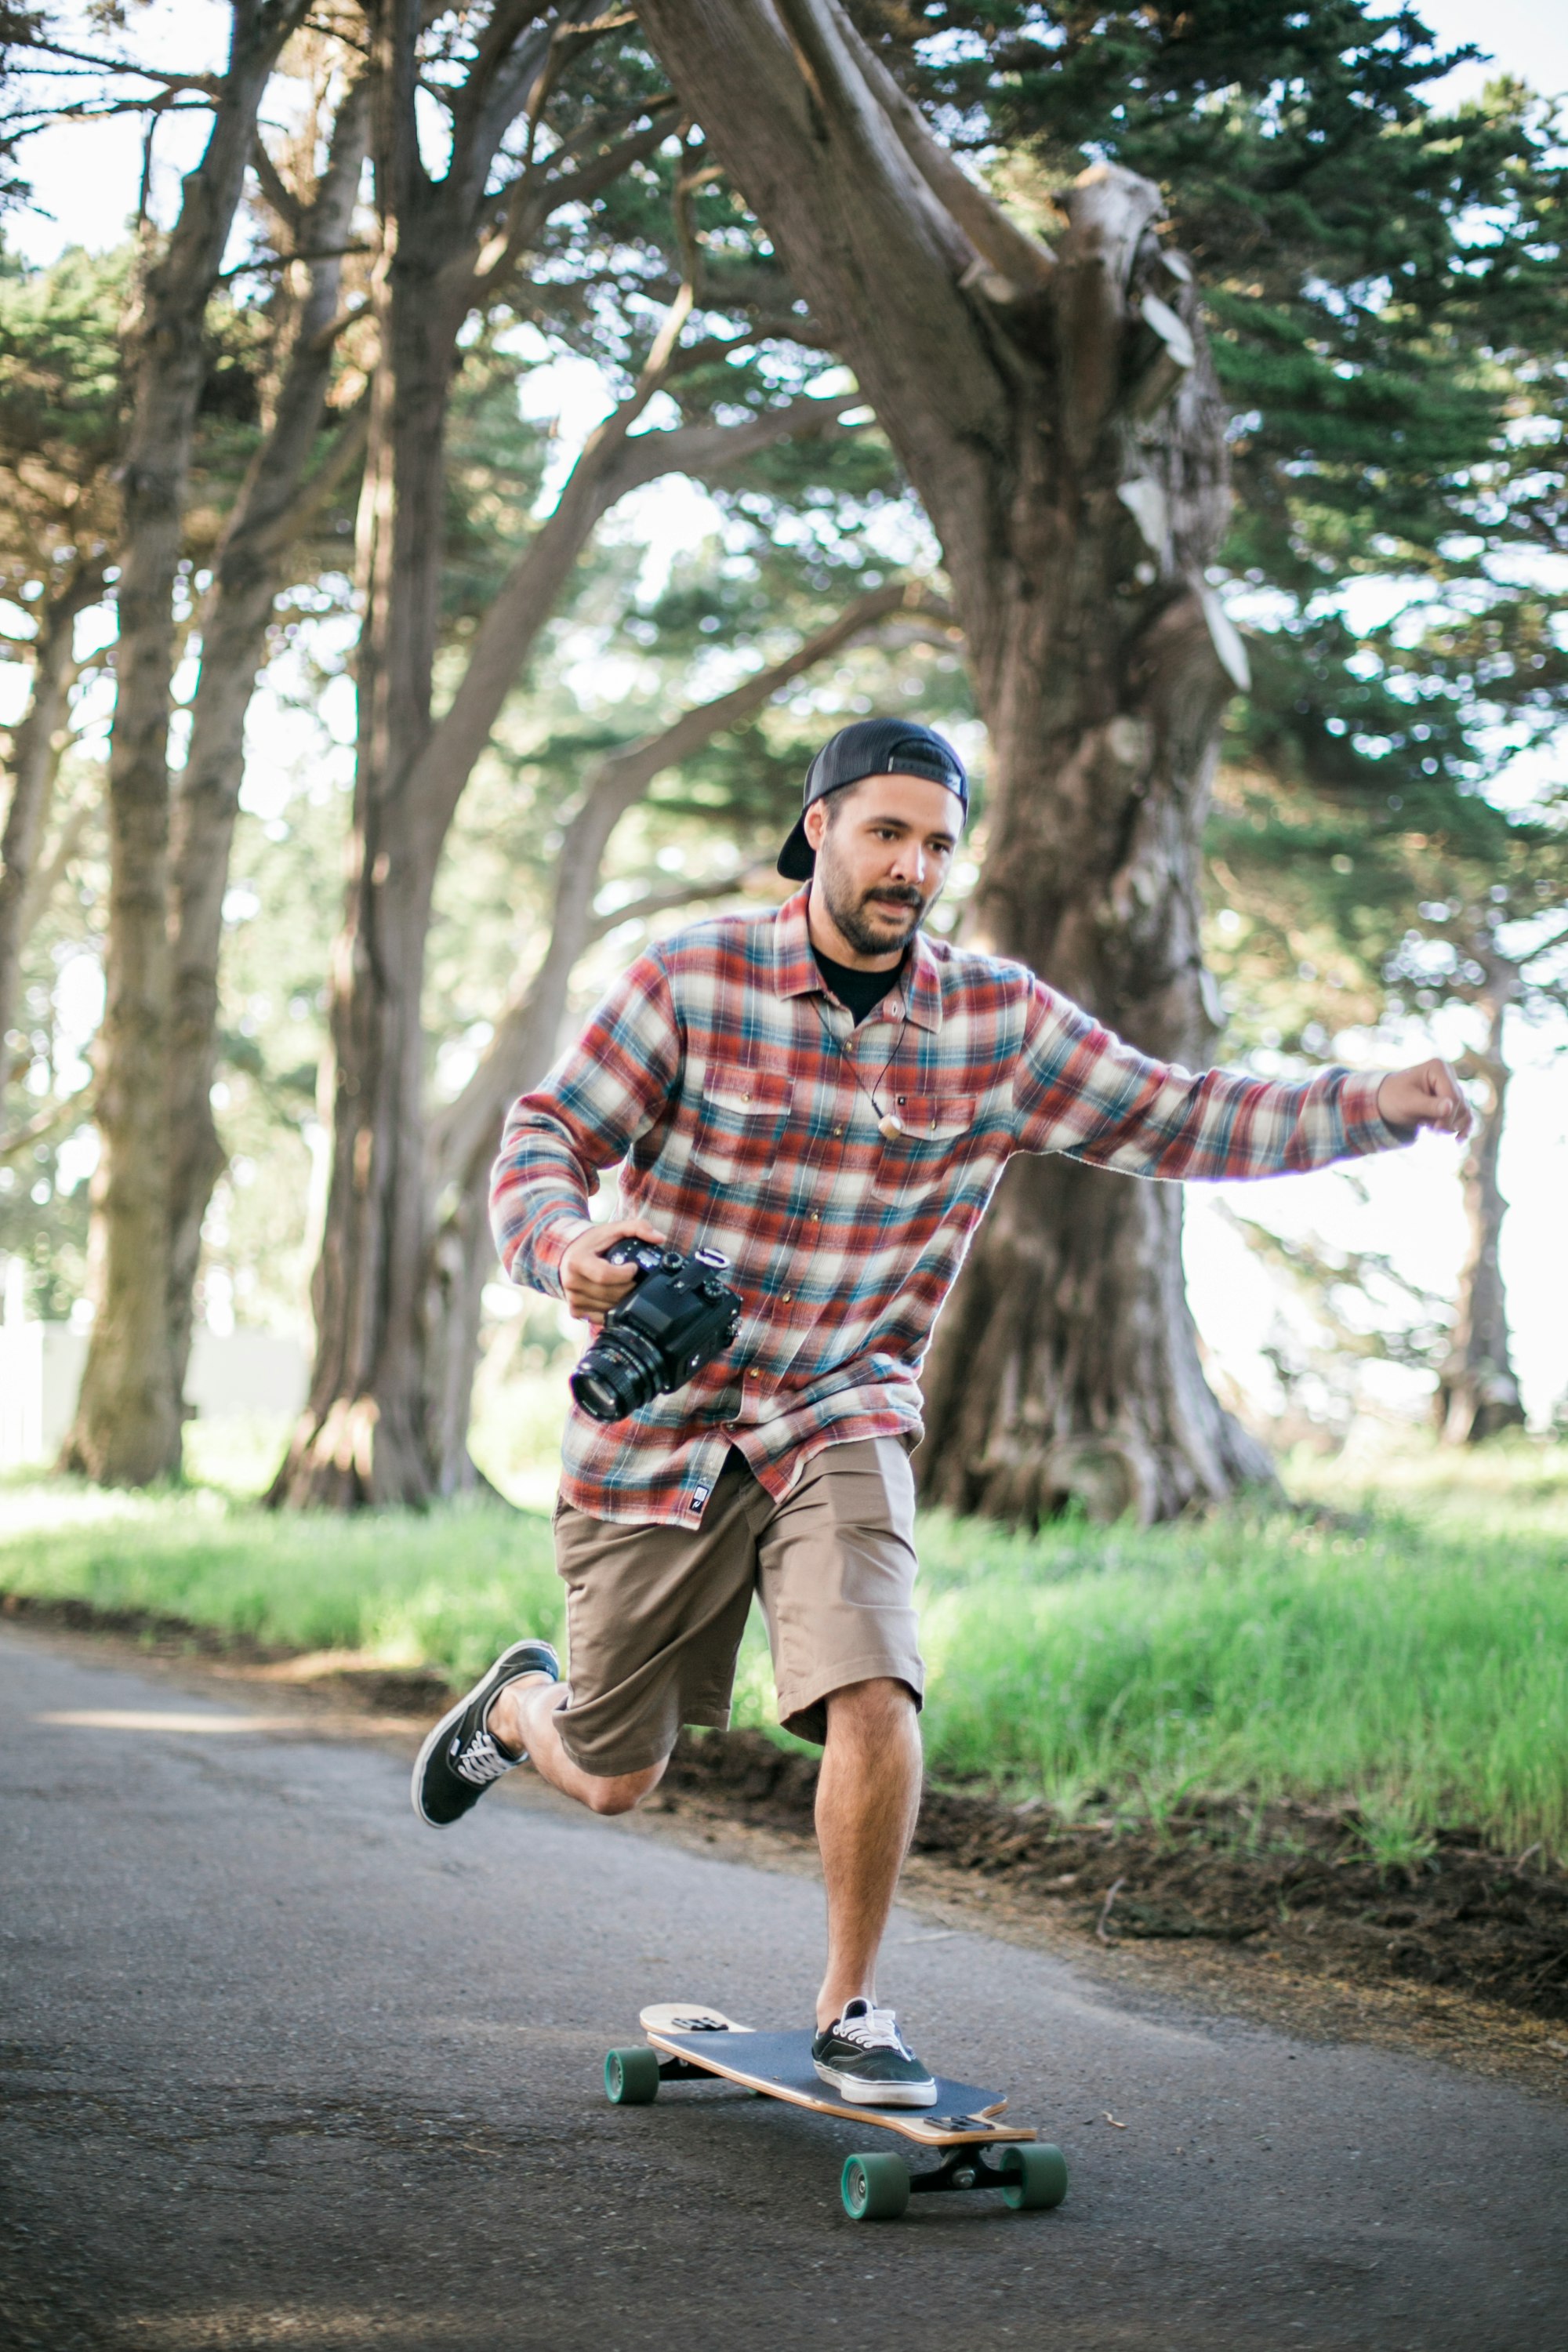 A man in a plaid fennel shirt and vans sneakers is holding a film photography camera while balancing on one leg while skating on a long board, skate board.